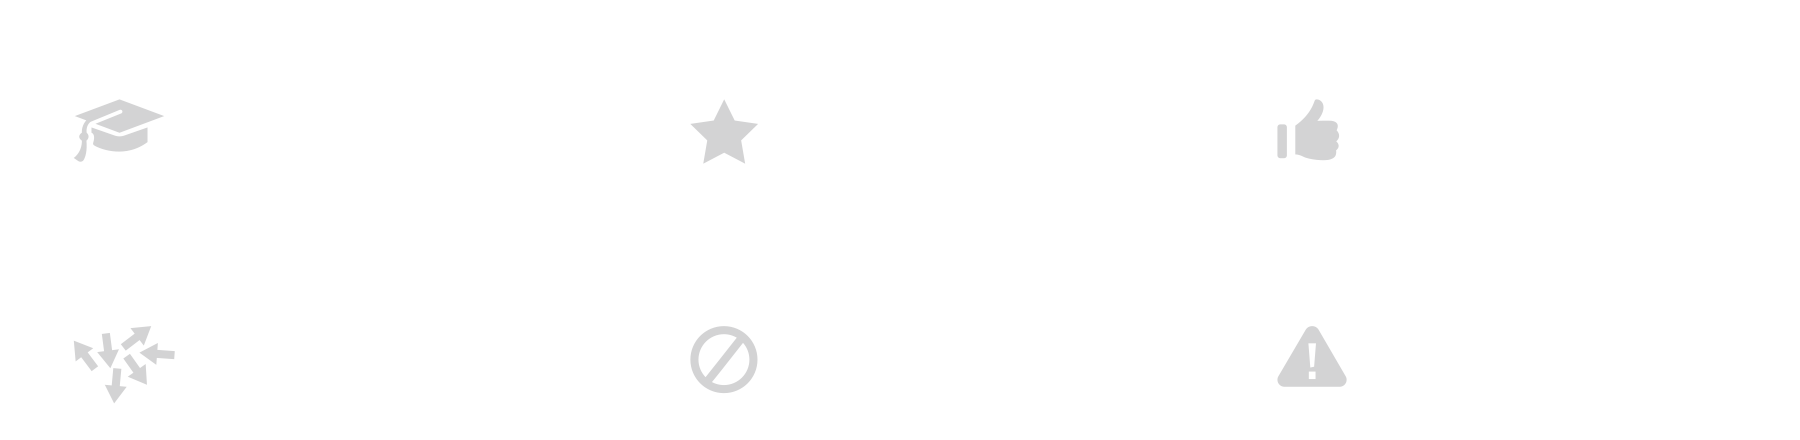 would pursue a career in journalism again: 77%, Are extremely proud of their work: 75%, Are very or somewhat satisfied with their job: 70%, Use a negative word to describe the news industry-words like struggling and chaos are most common: 72%, Are extremely or very concerned about future restrictions on press freedoms: 57%, Say made-up news and information is a very big problem form the country: 71%